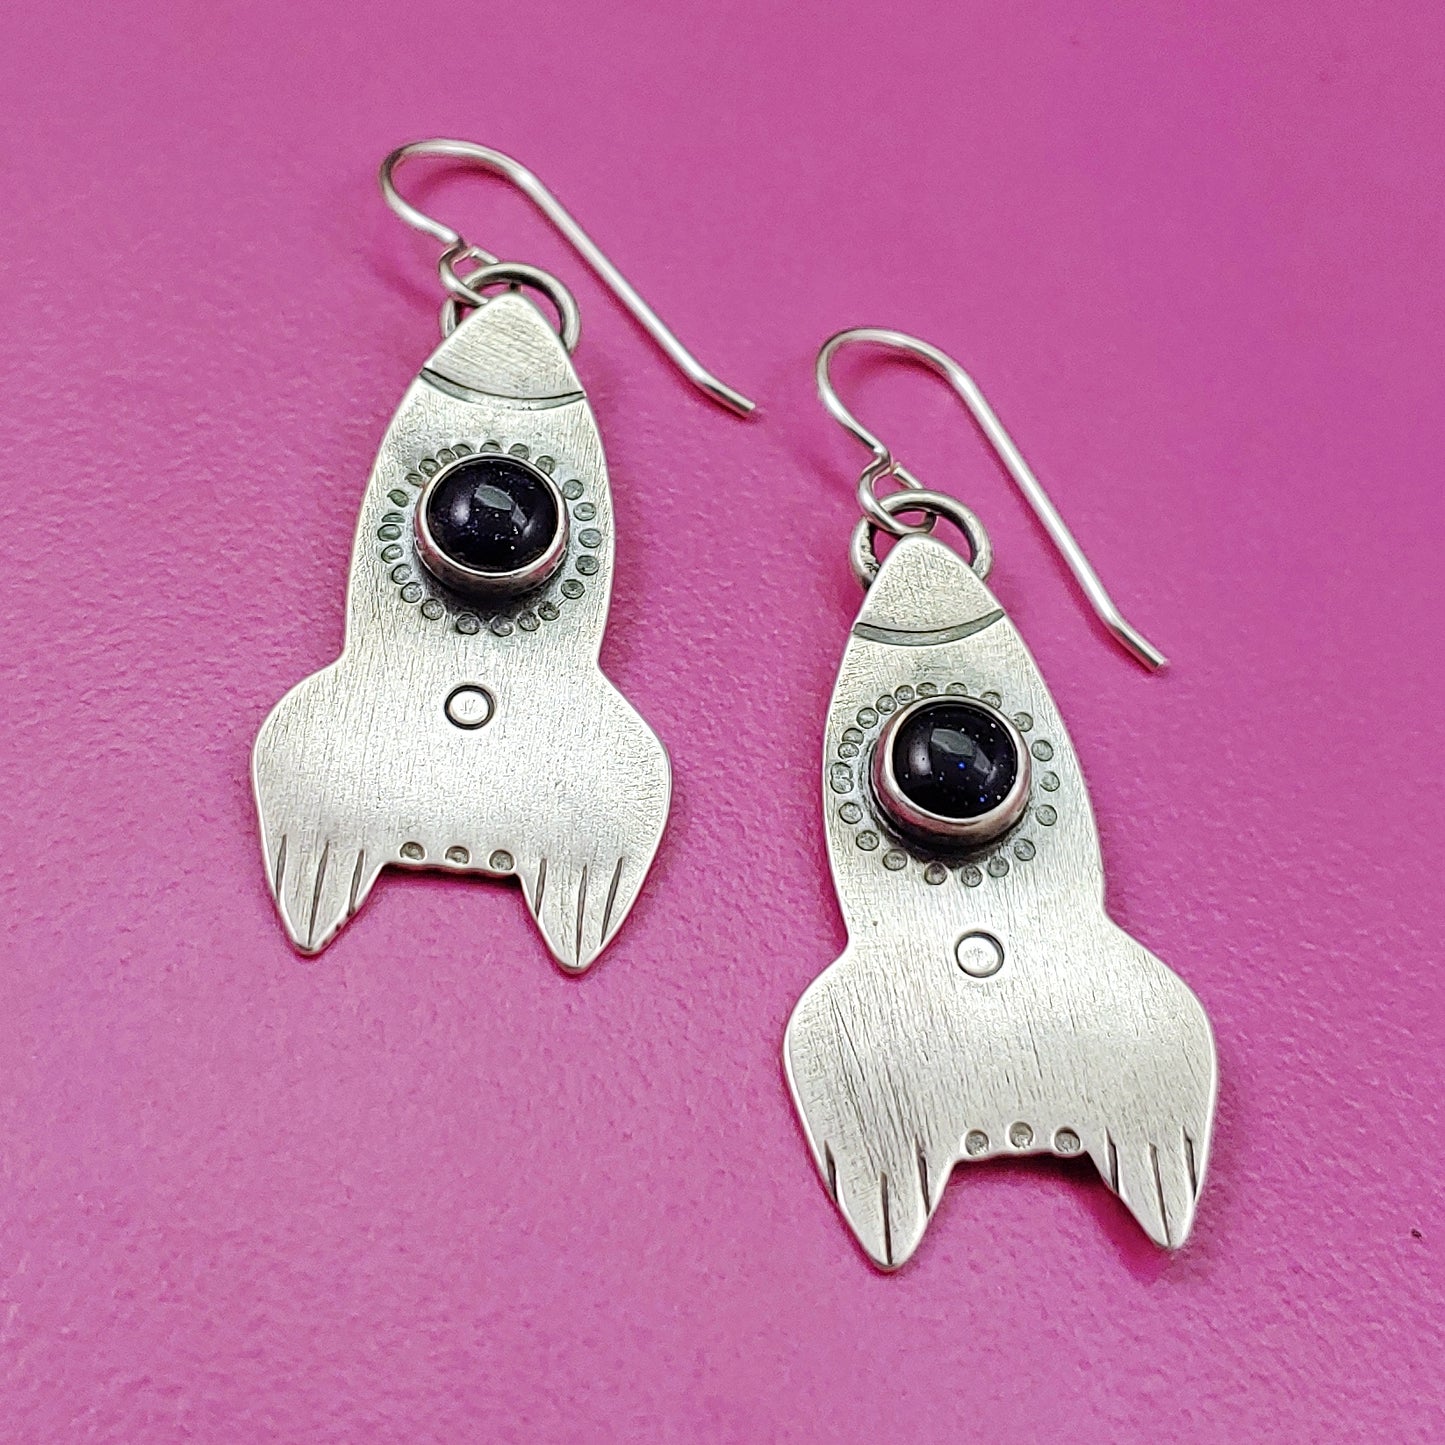 Rocket ship earrings in sterling silver on pink bacground